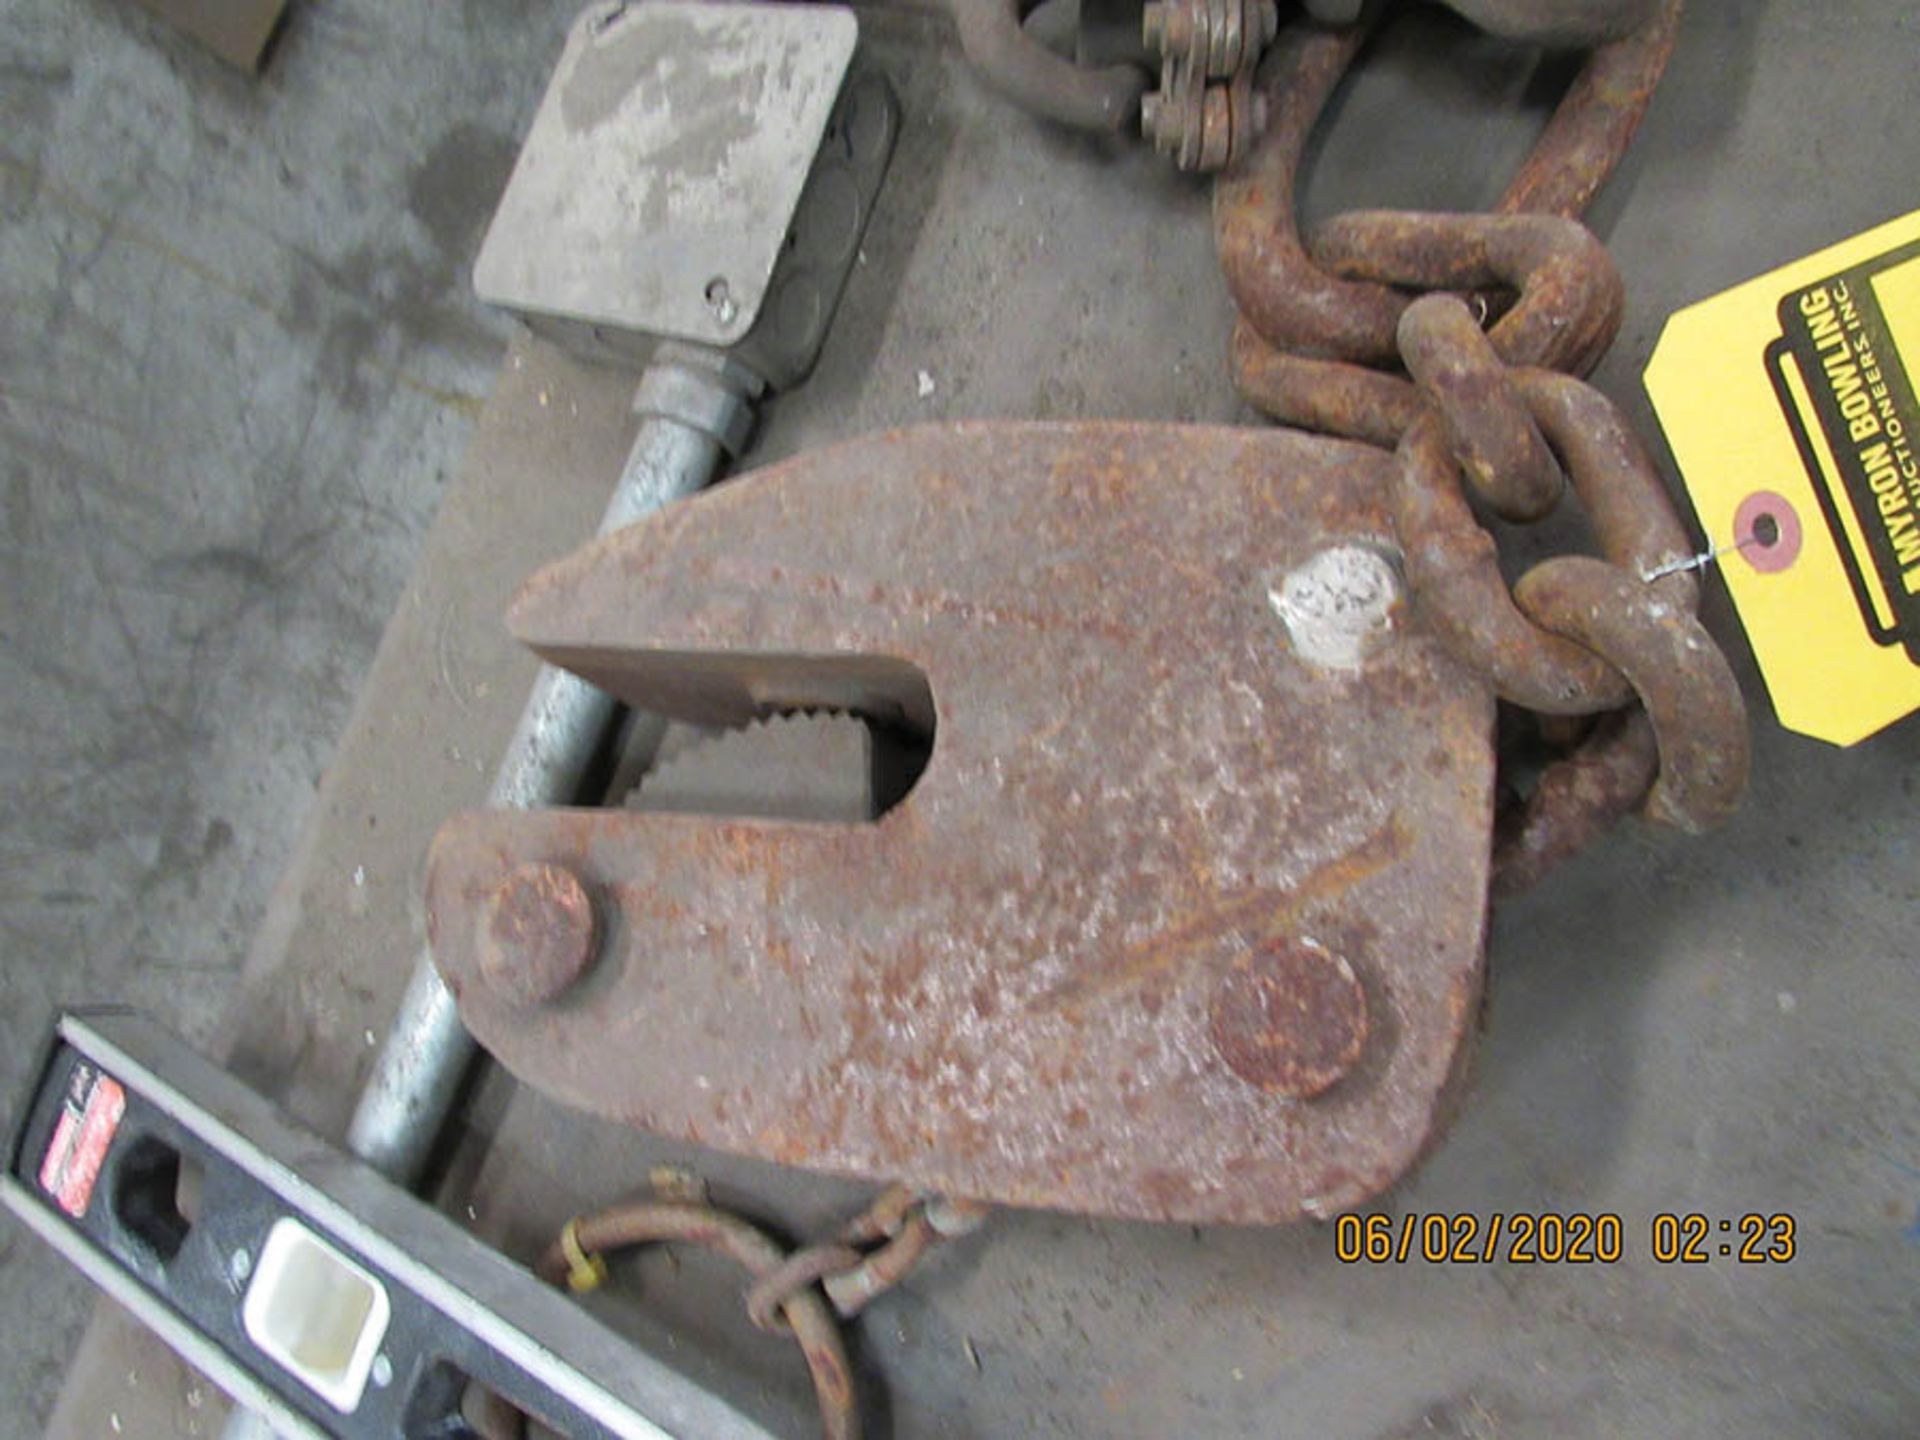 SHEET METAL LIFTER, AMERICAN PIPE TOOL CHAIN, AND NO. 2 CHAIN VISE - Image 2 of 2